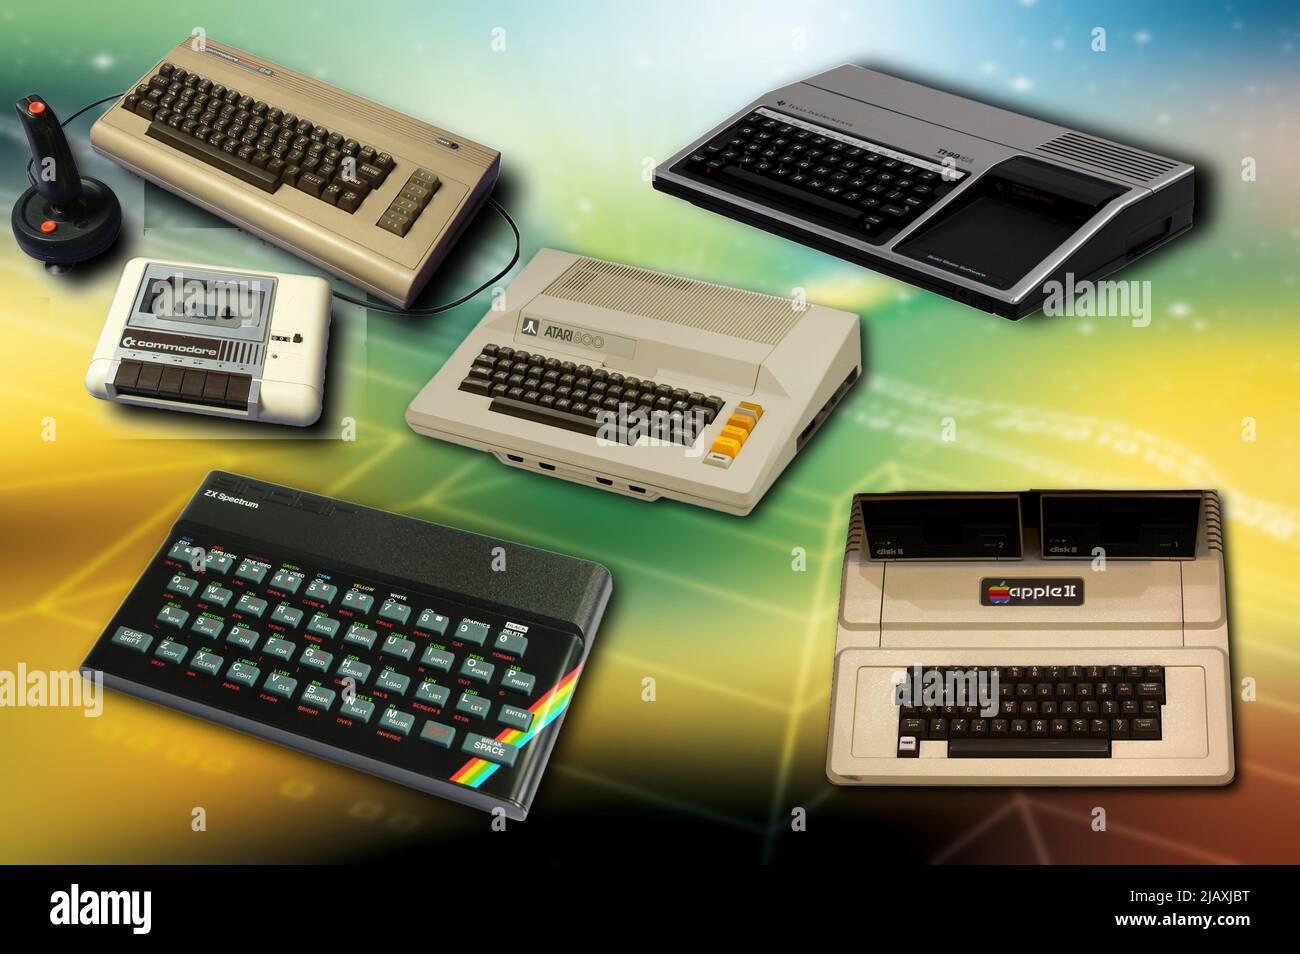 Computer Archaeology - The first and iconic Home Computers that in the 80s began the computer revolution. Stock Photo